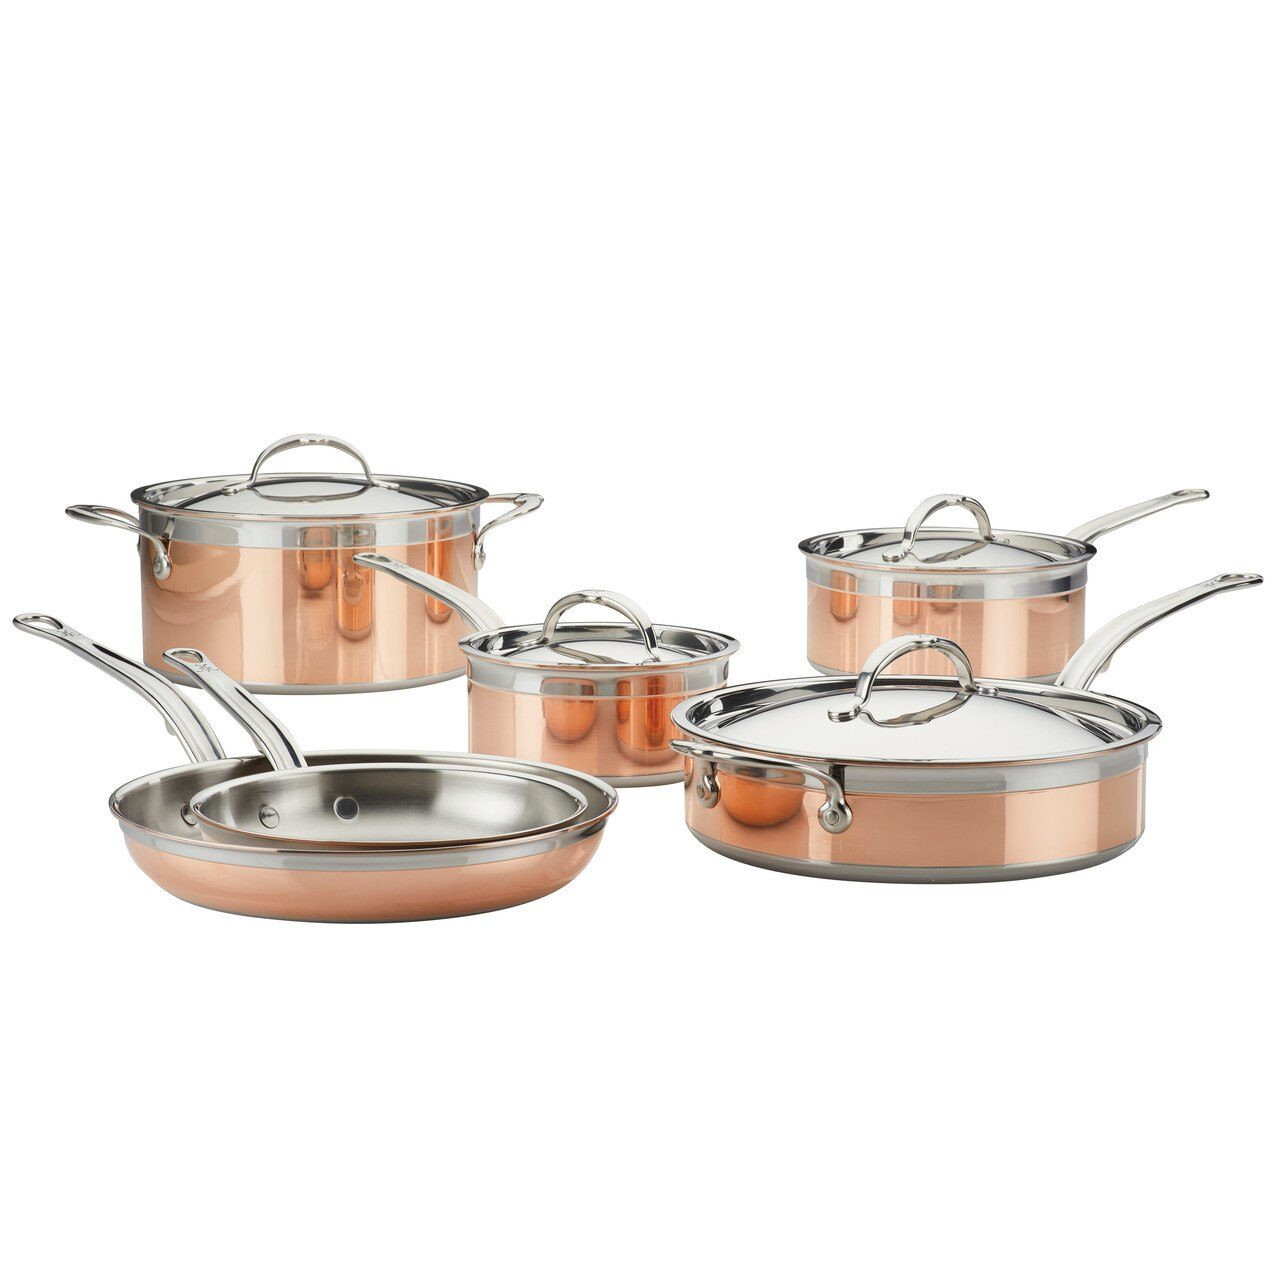 White and Copper Kitchen Utensils - 18 PC Copper Cooking Utensils Set  Includes Copper Utensil Holder, White & Copper Measuring Cups and Spoons,  Rose